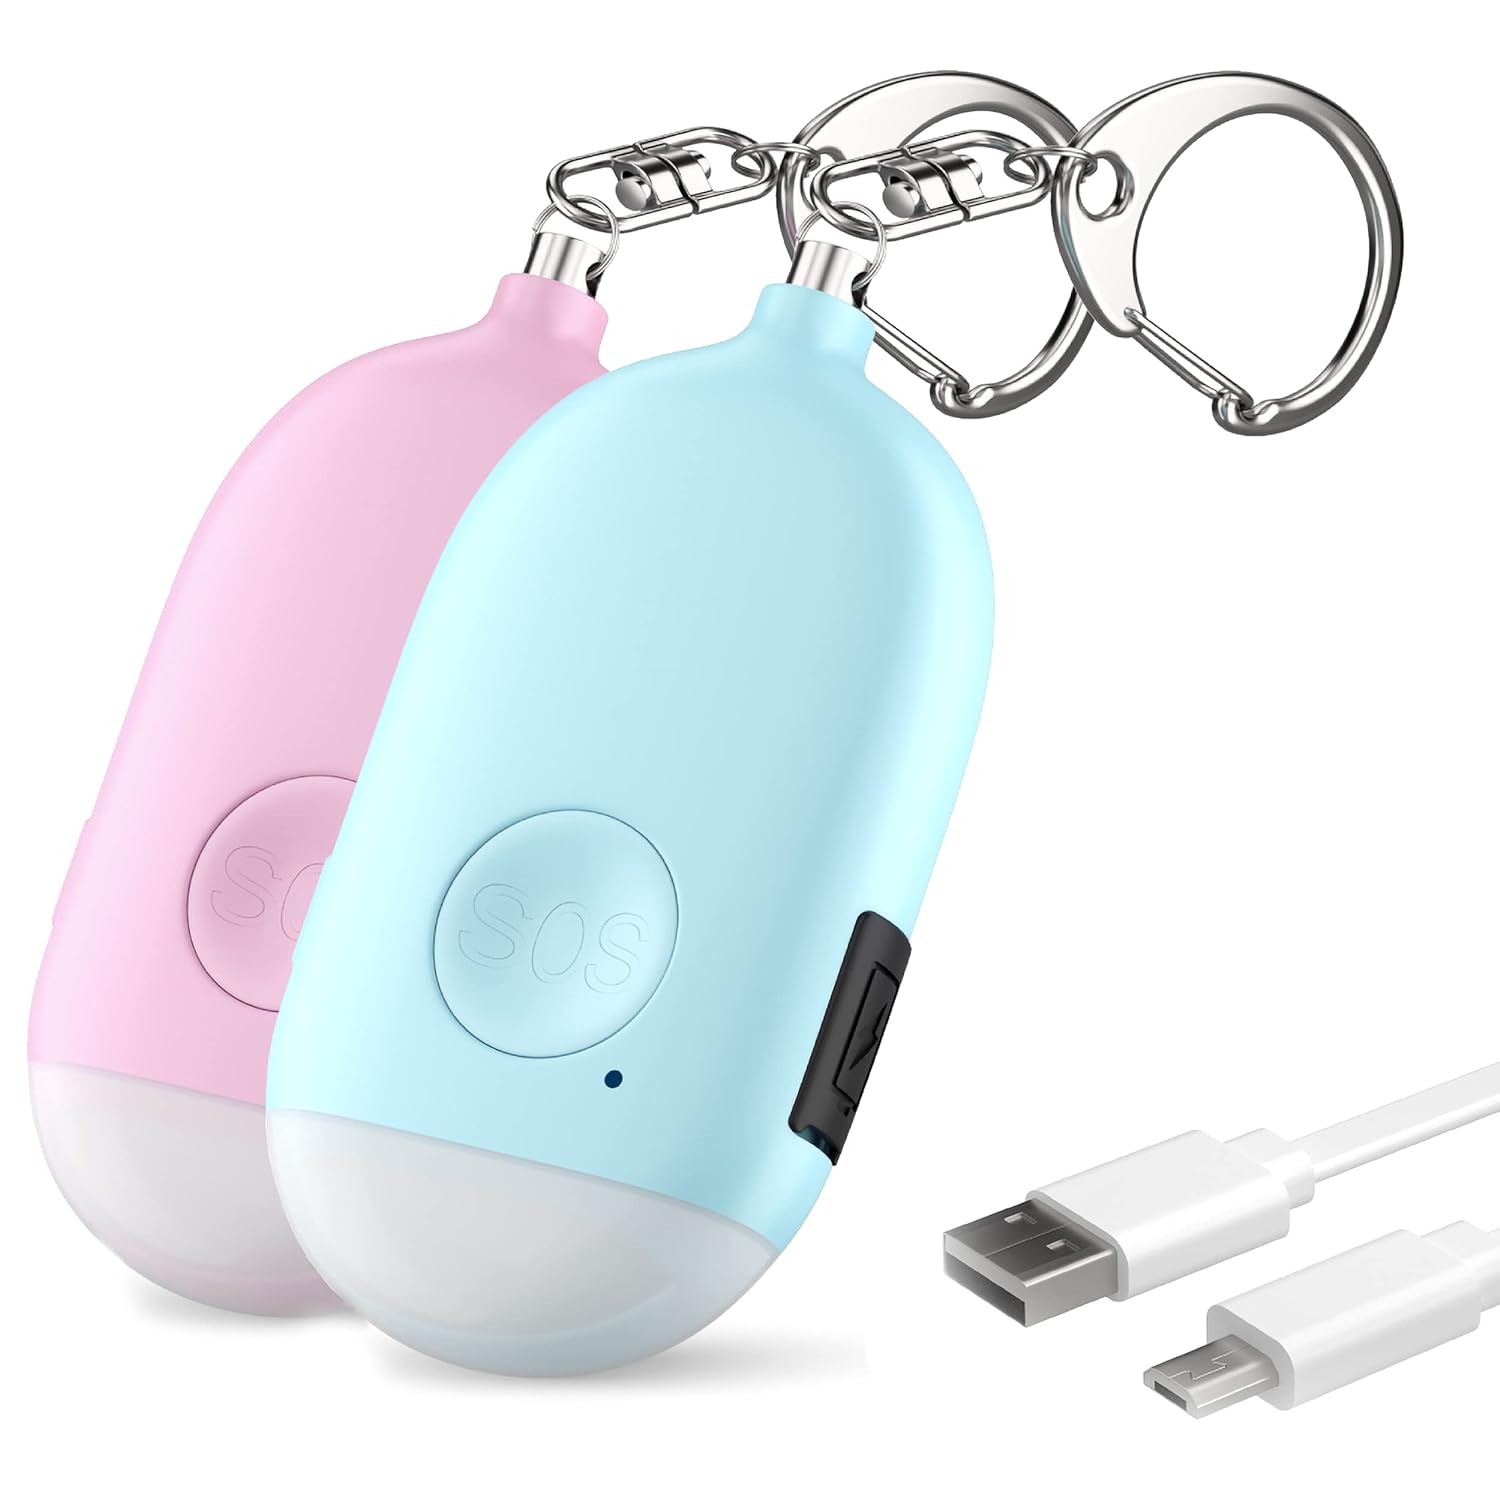 Rechargeable Self Defense Keychain Alarm ââ‚¬â€œ 130 dB Loud Emergency Personal Siren Ring with LED Light ââ‚¬â€œ SOS Safety Alert Device Key Chain for Women, Kids, Elderly, and Joggers by WETEN (Pink&Blue)